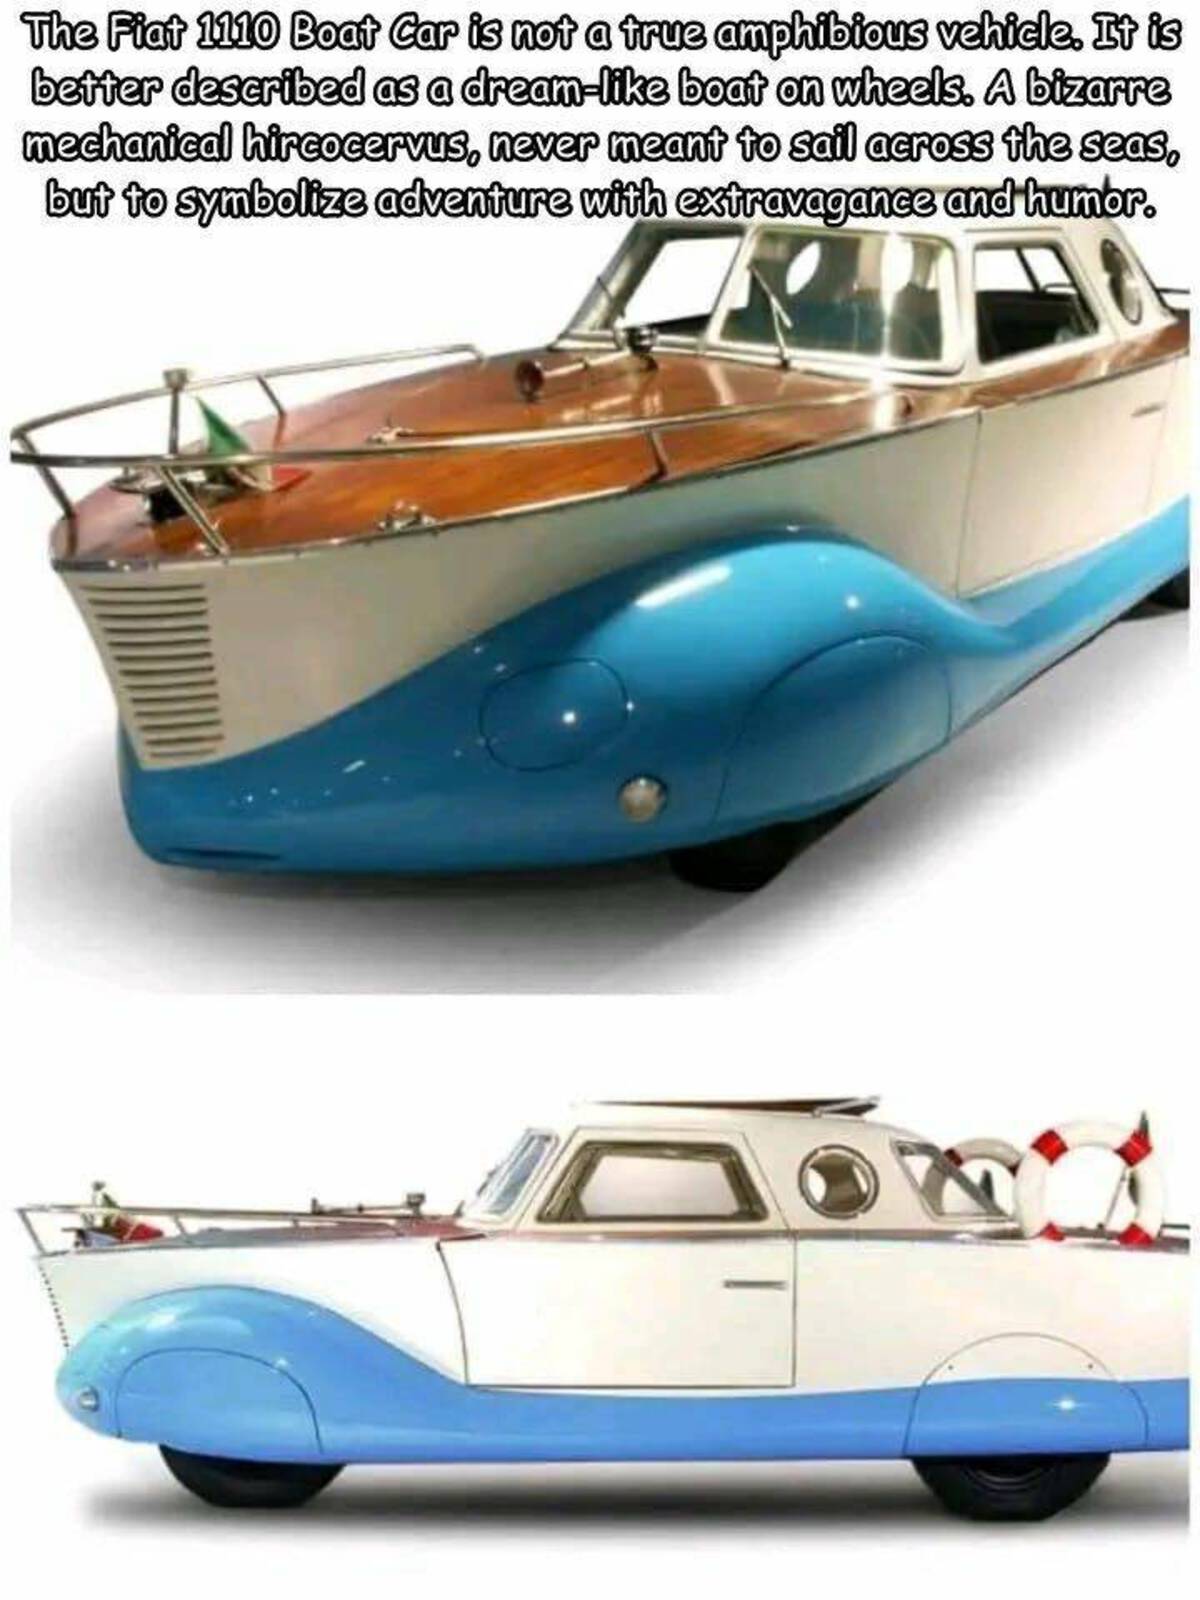 fiat bateau - The Fiat 1110 Boat Car is not a true amphibious vehicle. It is better described as a dream boat on wheels. A bizarre mechanical hircocervus, never meant to sail across the seas, but to symbolize adventure with extravagance and humor.